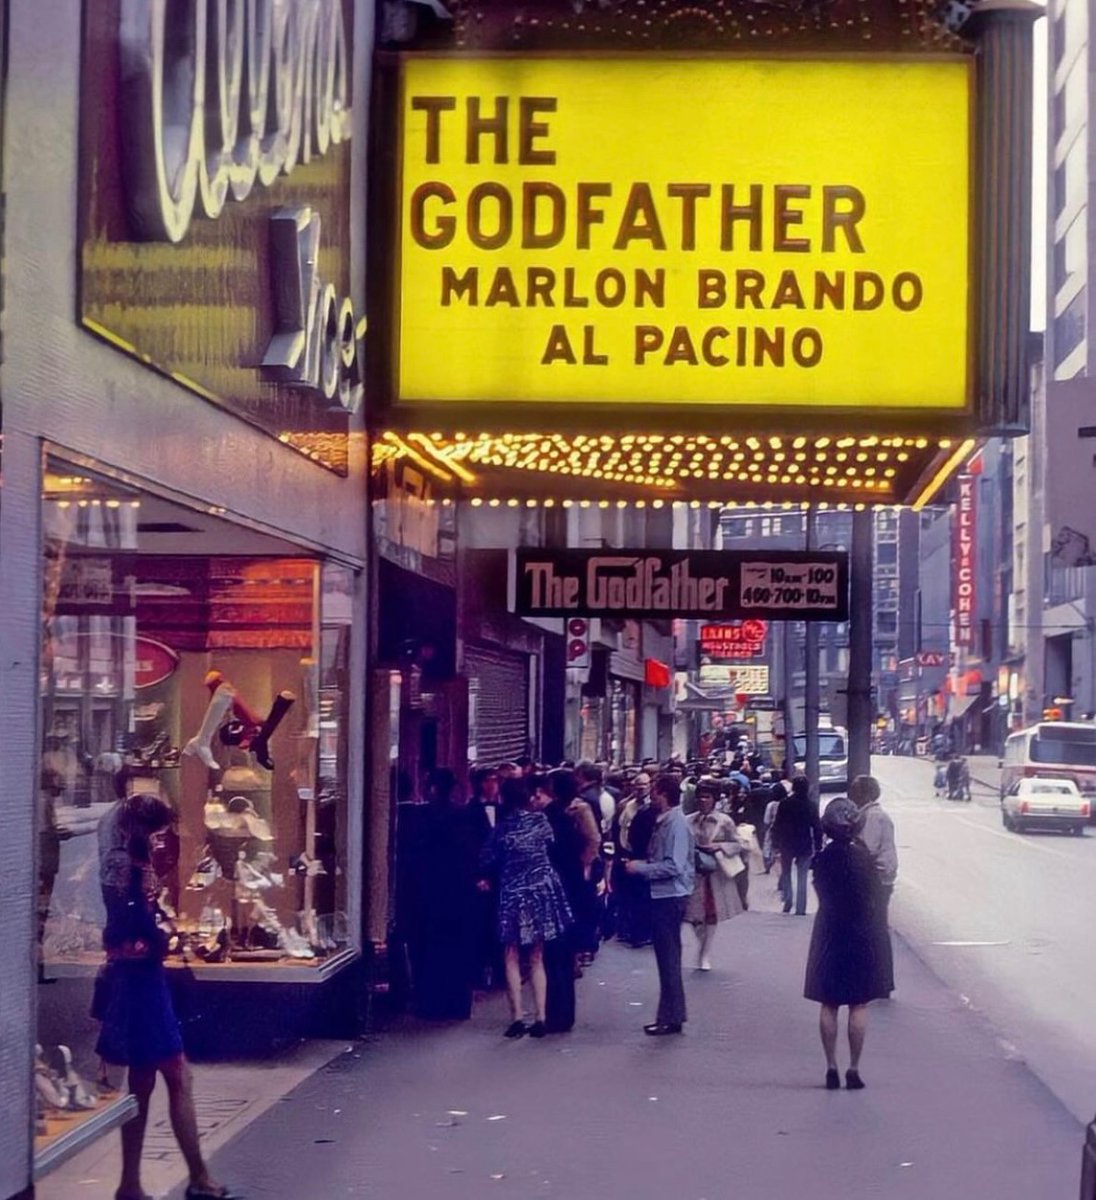 The line to see The Godfather at the Warner Theatre on Fifth Avenue in Pittsburgh, 1972.